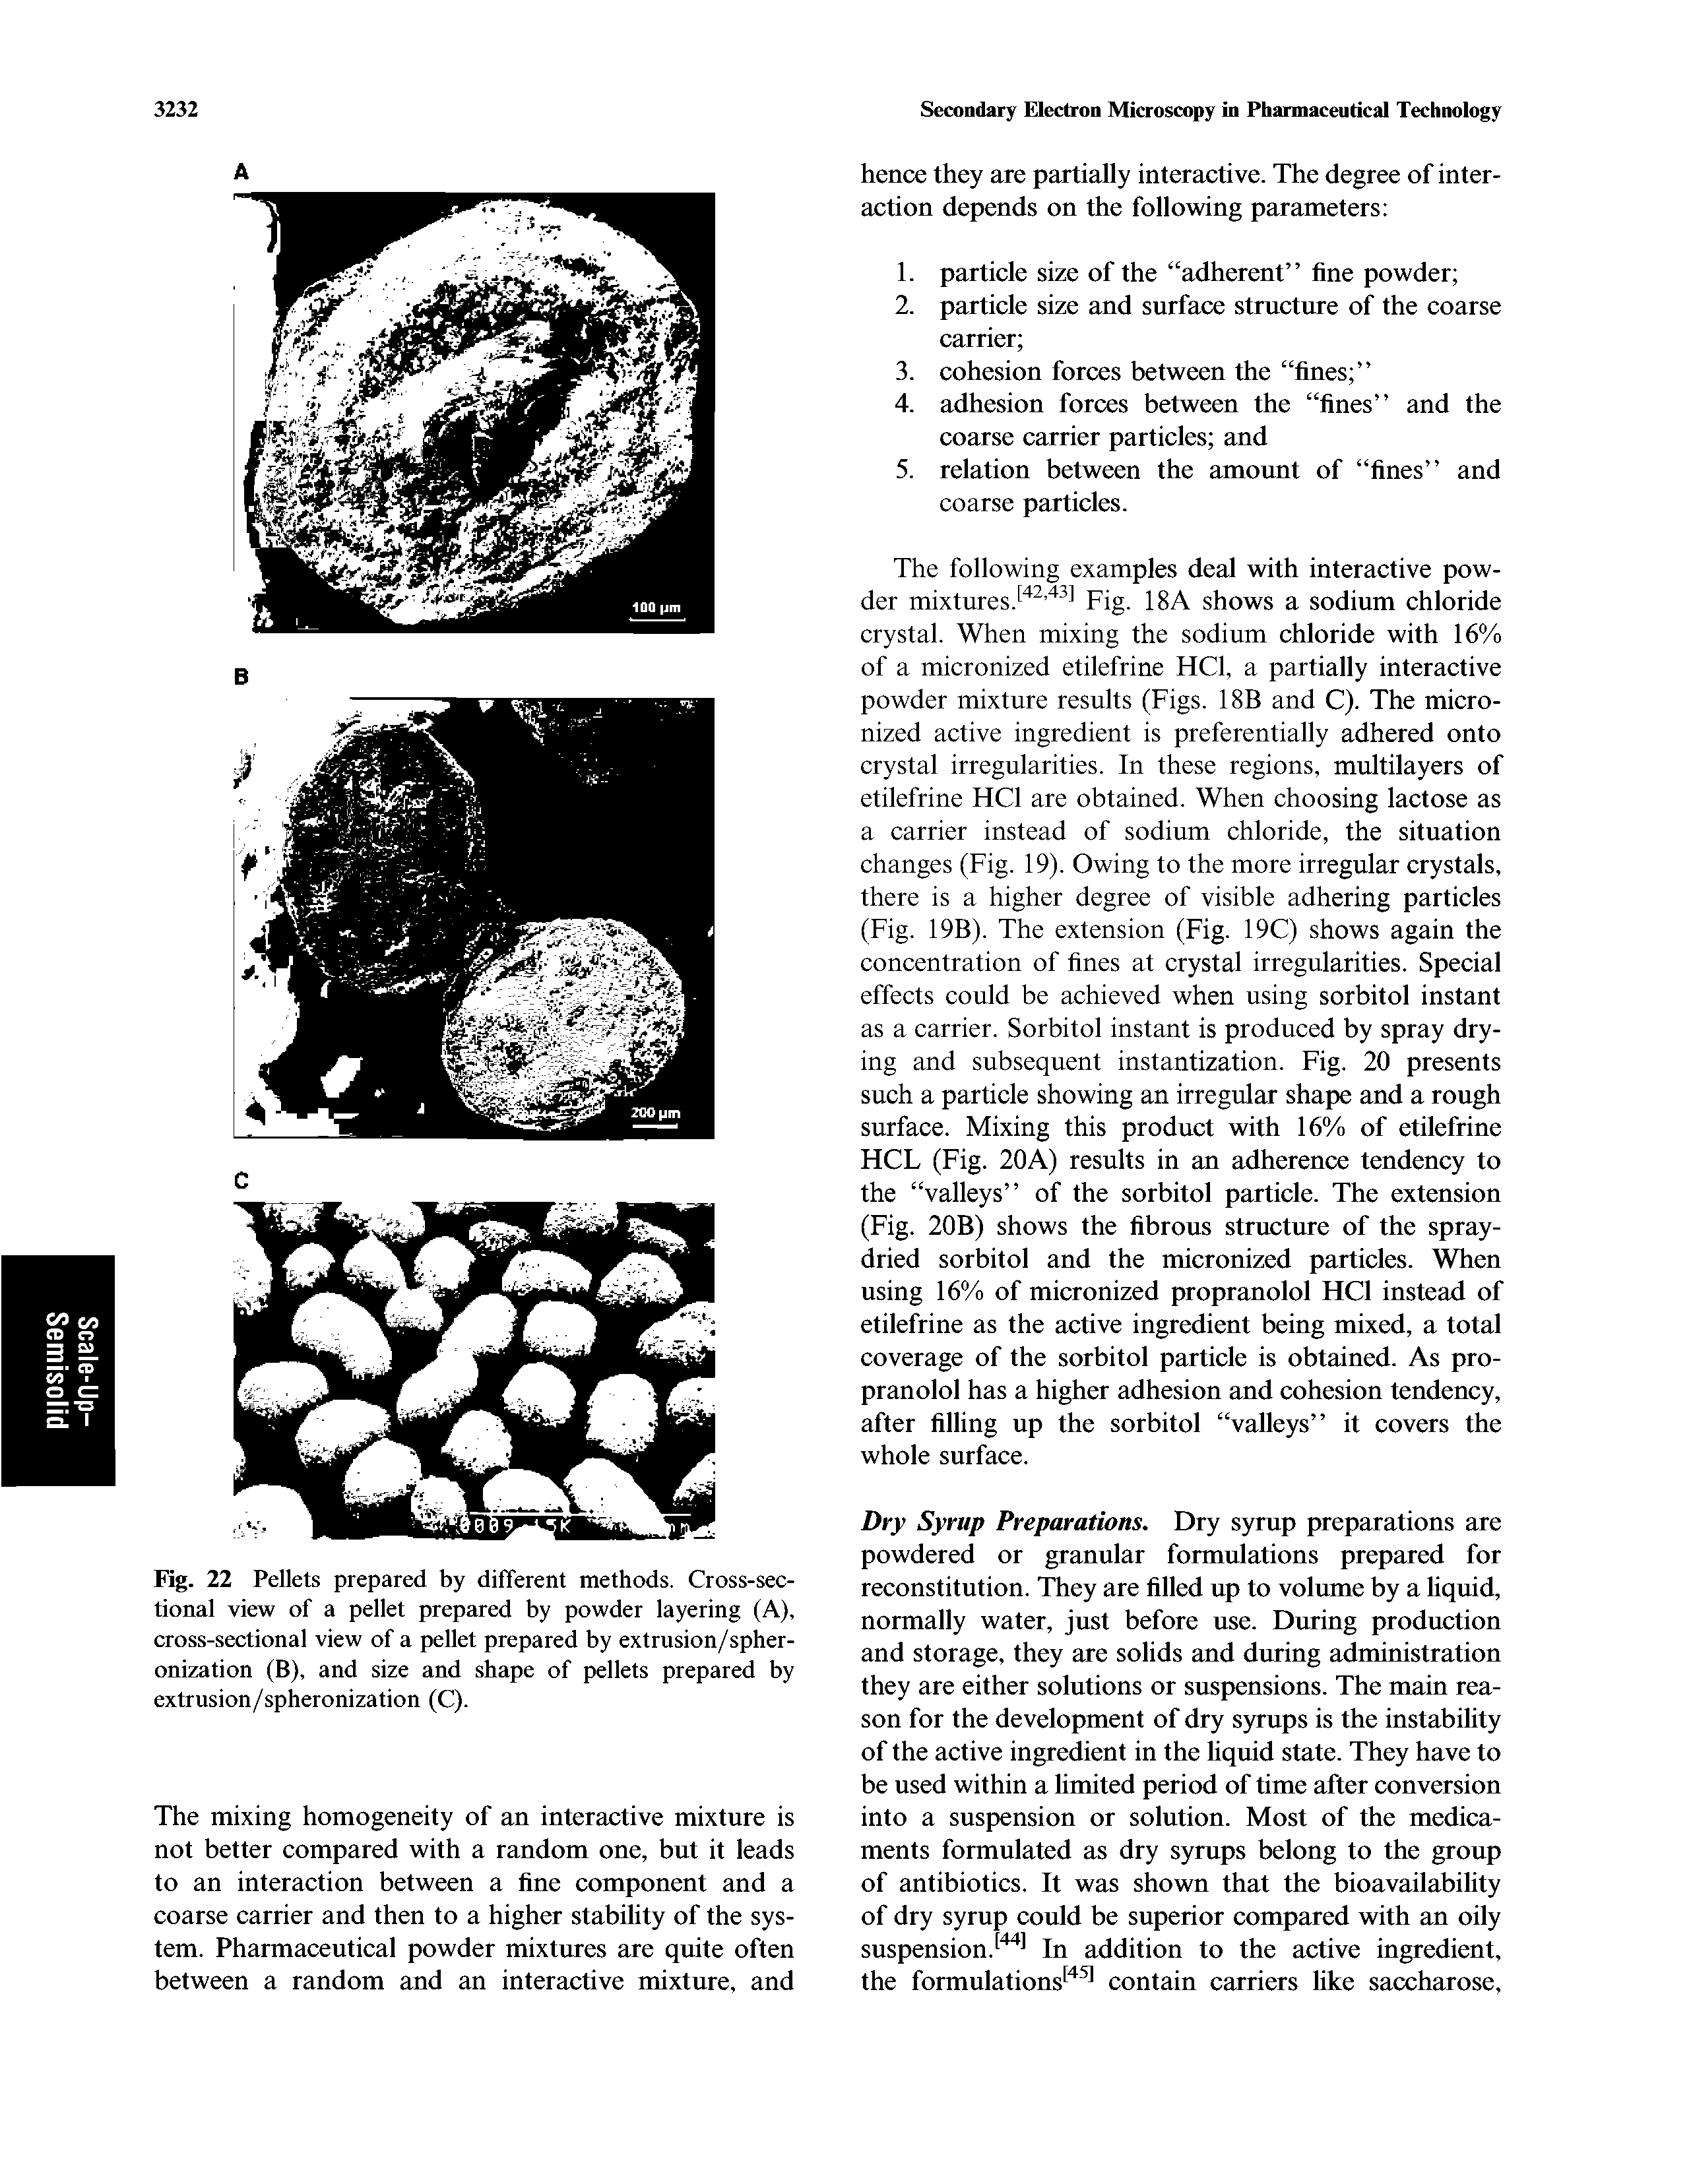 Fig. 22 Pellets prepared by different methods. Cross-sectional view of a pellet prepared by powder layering (A), cross-sectional view of a pellet prepared by extrusion/spher-onization (B), and size and shape of pellets prepared by extrusion/spheronization (C).